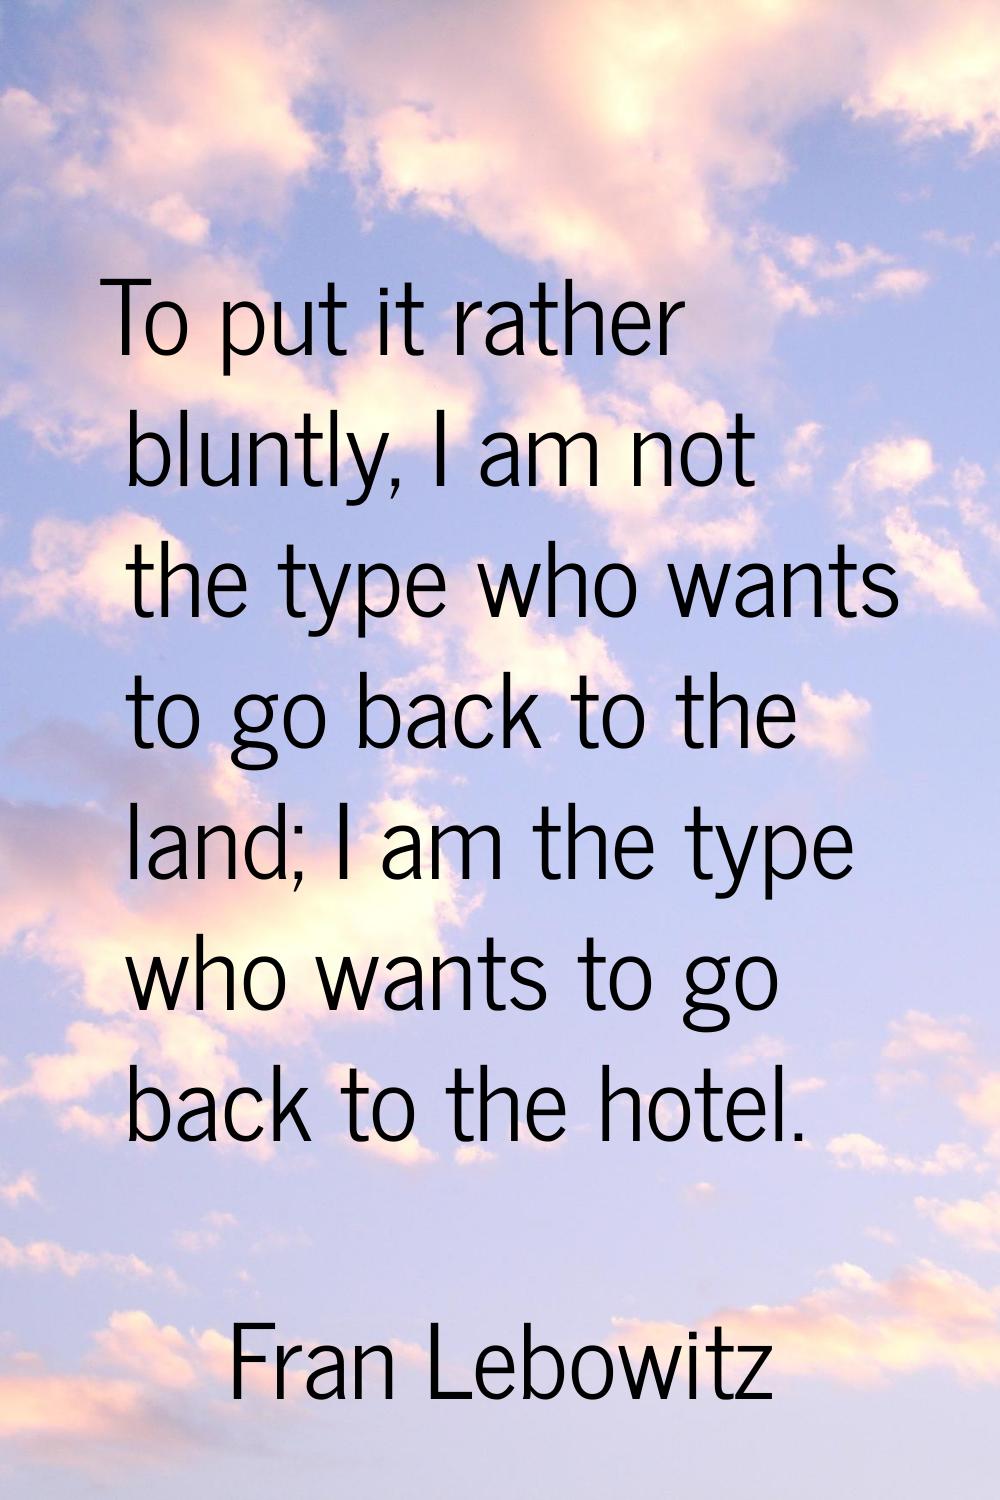 To put it rather bluntly, I am not the type who wants to go back to the land; I am the type who wan